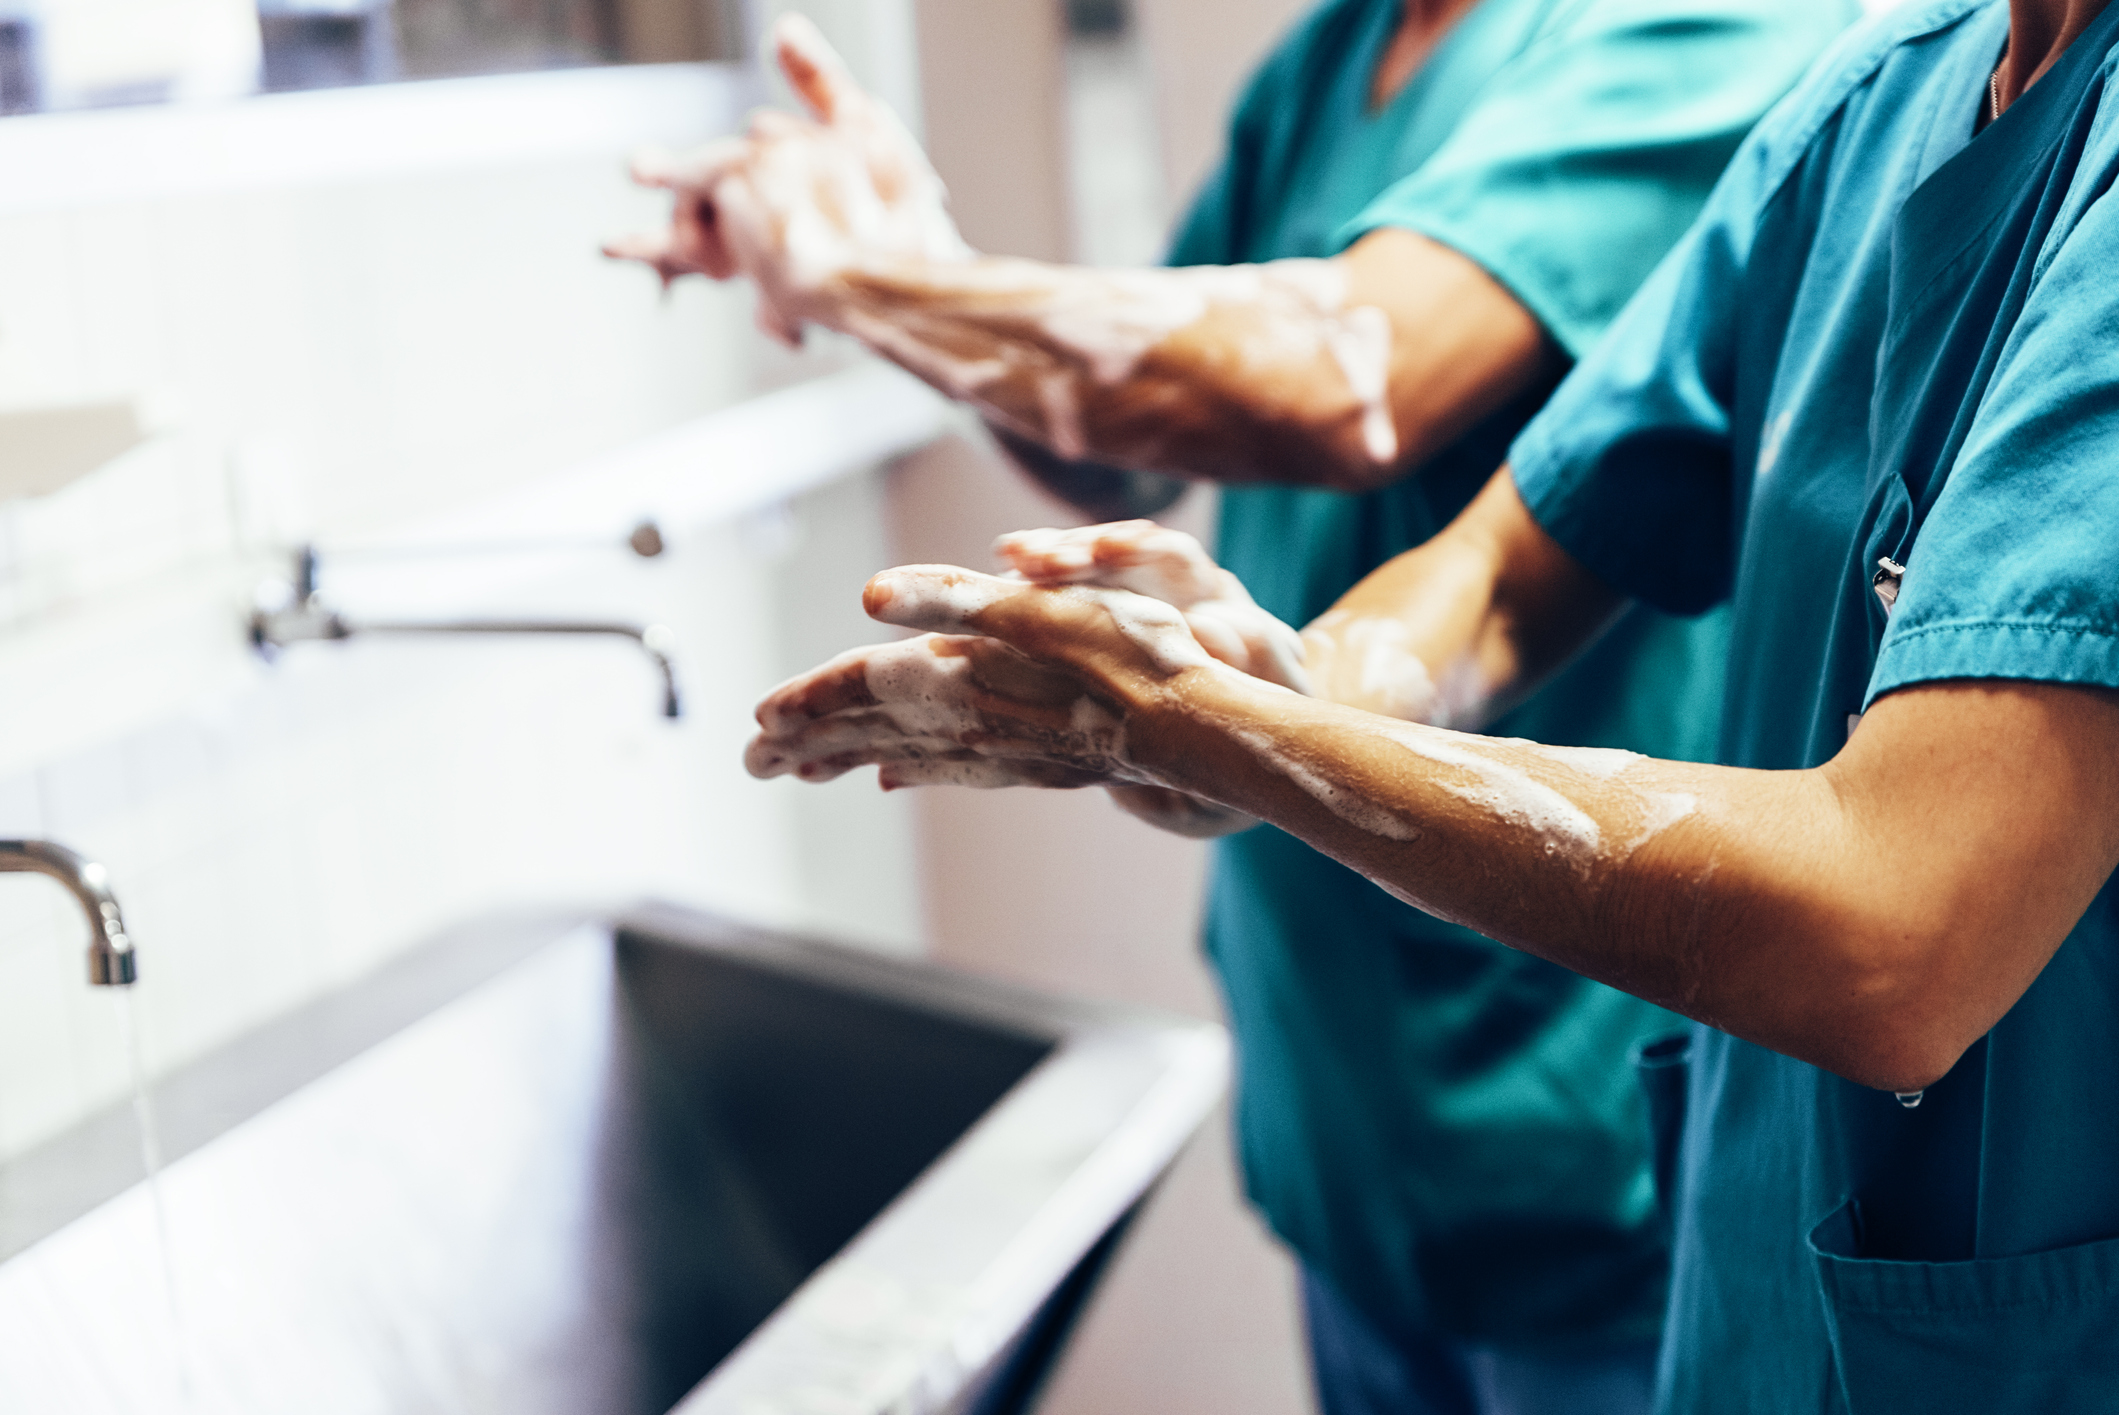 people in scrubs washing their hands in a healthcare facility